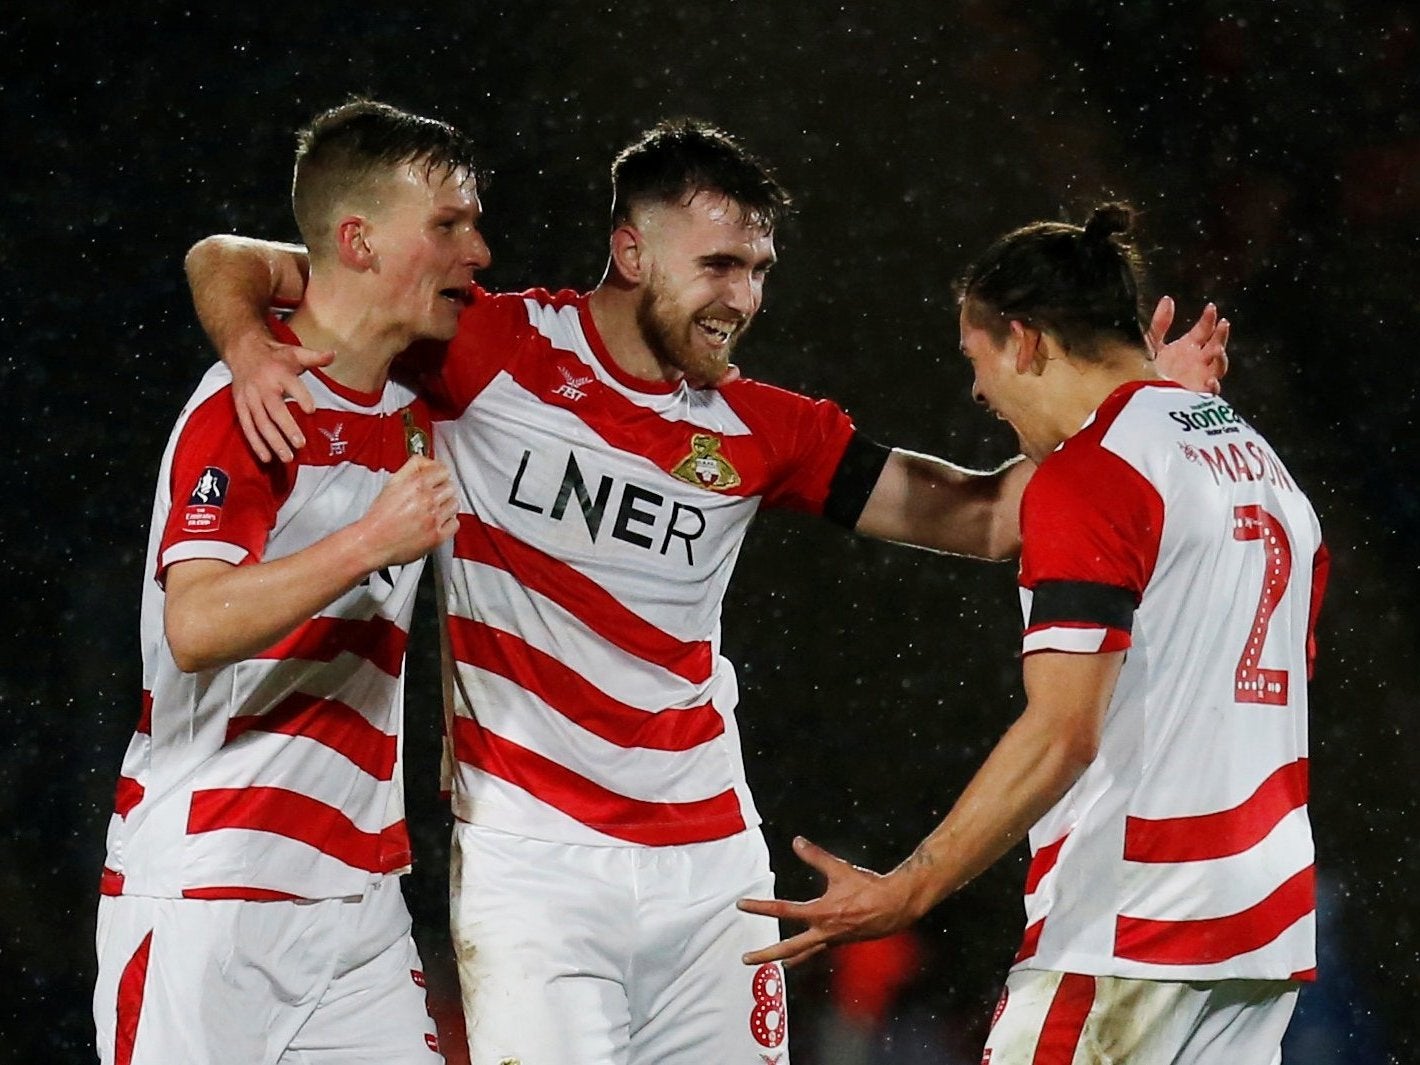 Ben Whiteman's penalty handed Doncaster victory over Oldham